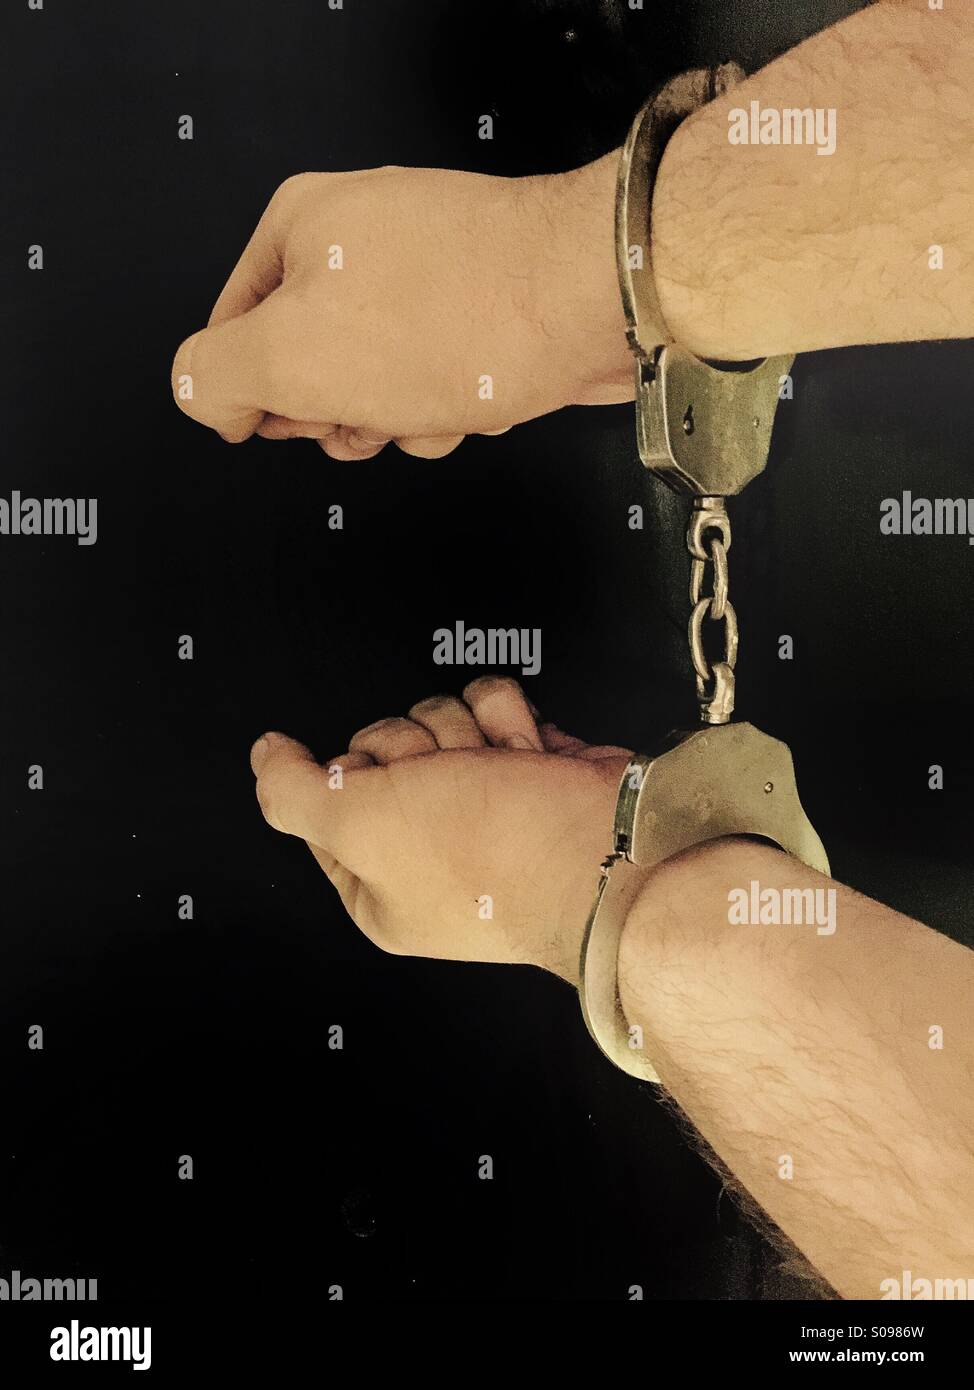 Pair of hands being restrained with police handcuffs Stock Photo